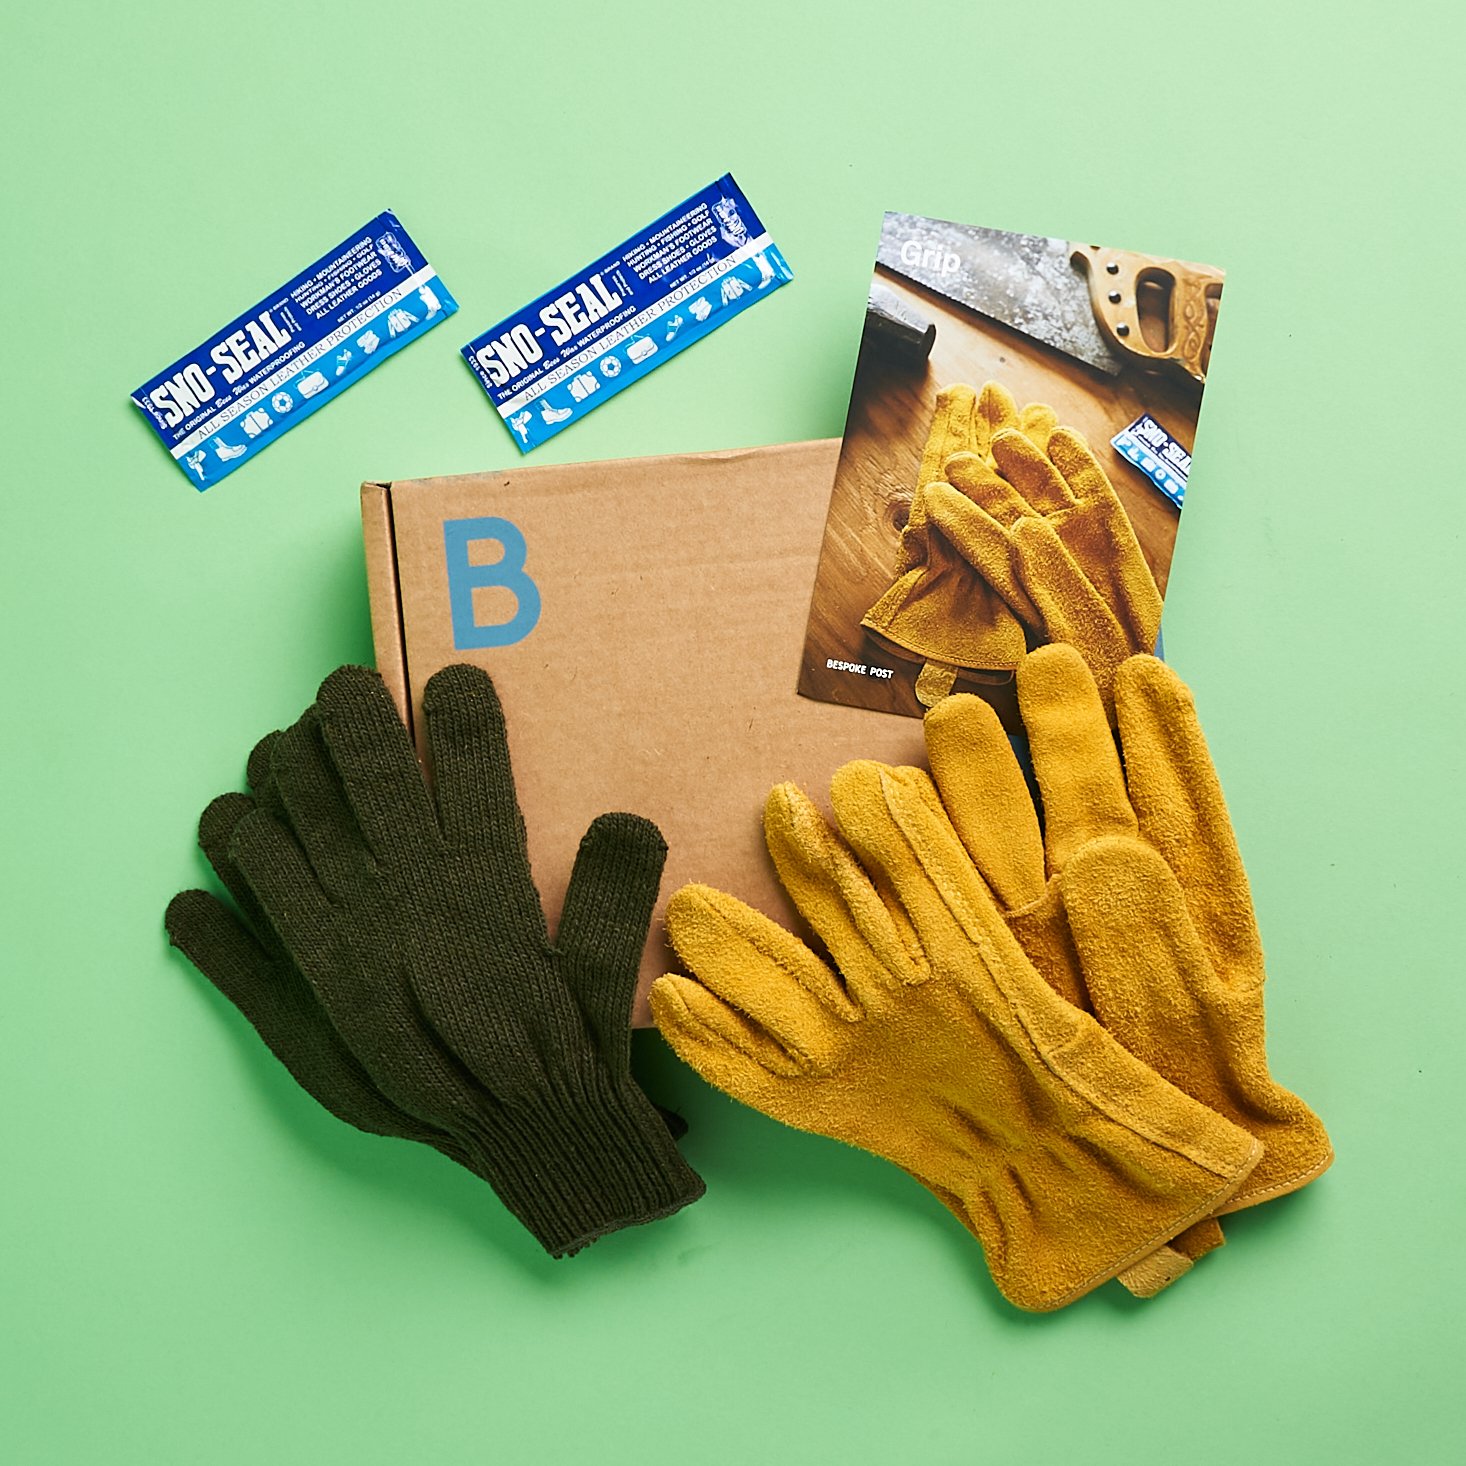 Everything in the box. Yellow Buffalo suede work gloves, brown-knit glove inserts, and two packets of waterproofing gel all atop a brown box.